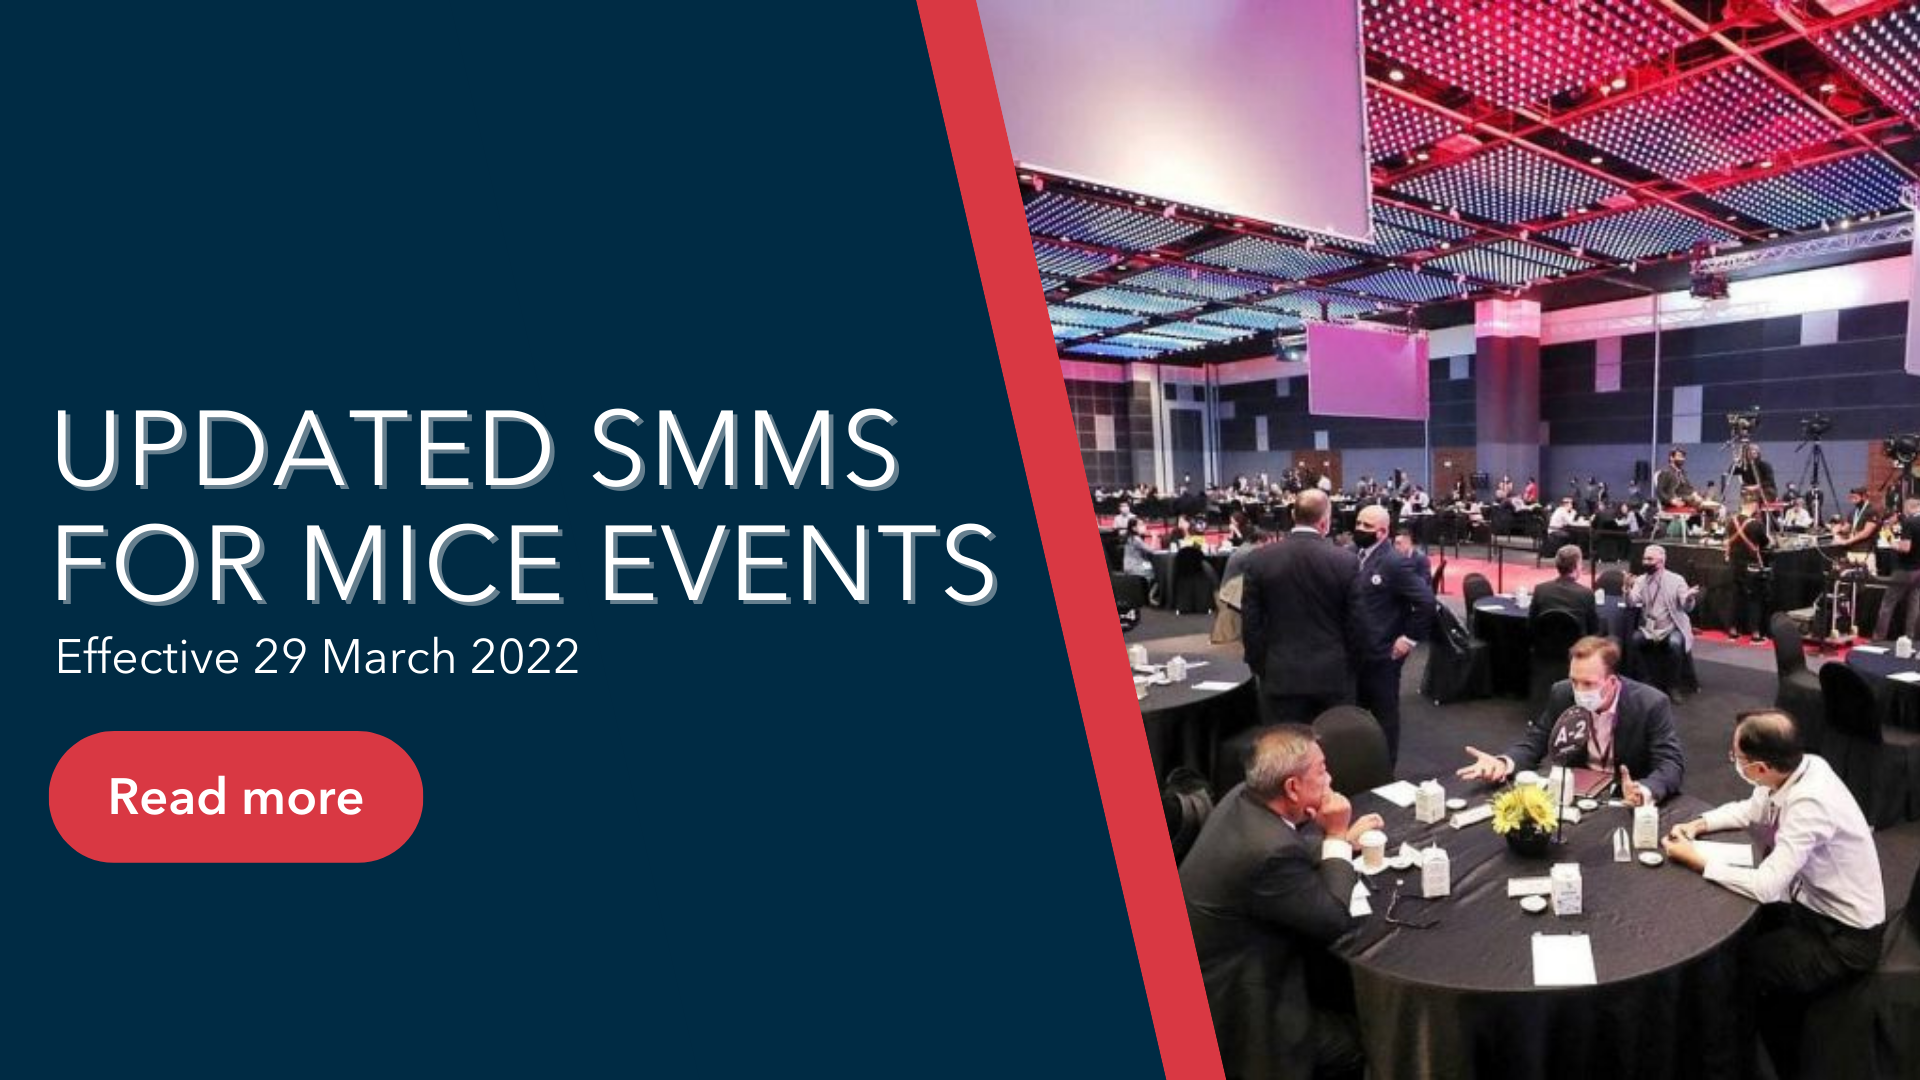 SMMs for MICE Events effective 29 March 2022